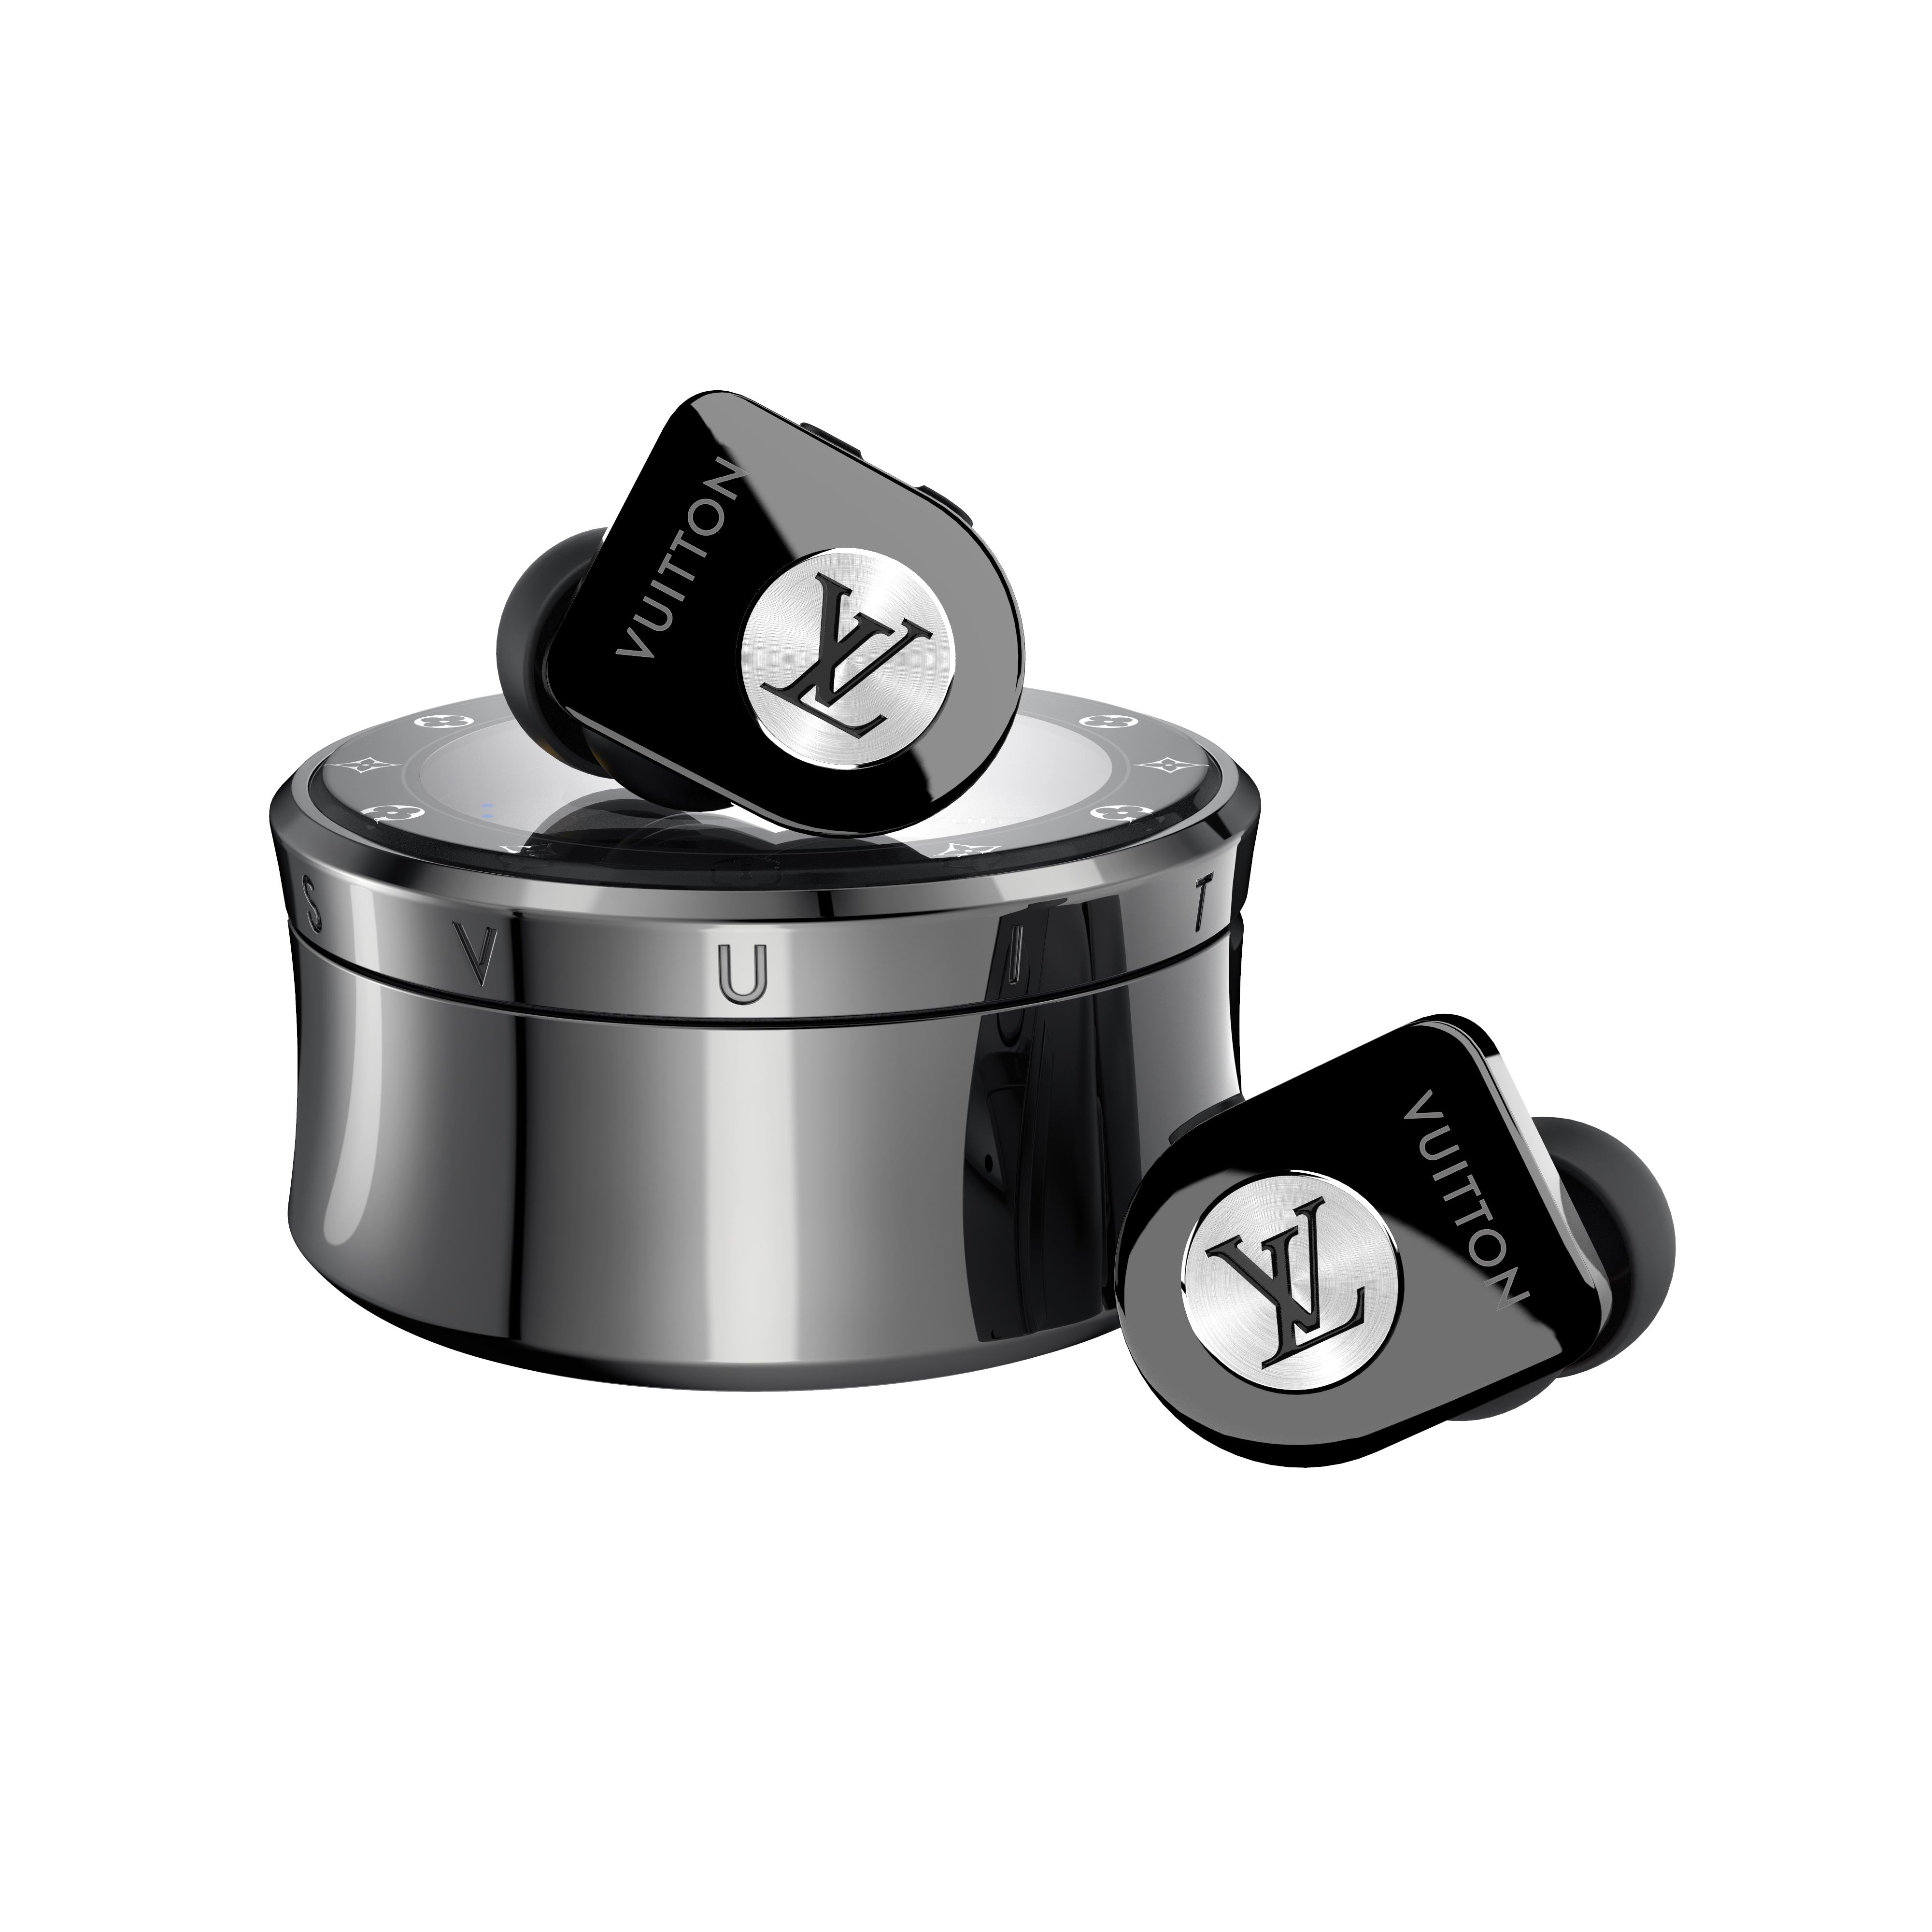 Louis Vuitton Horizon Light Up earphones by Master & Dynamic: The ultimate  luxury audio experience - Essential Homme